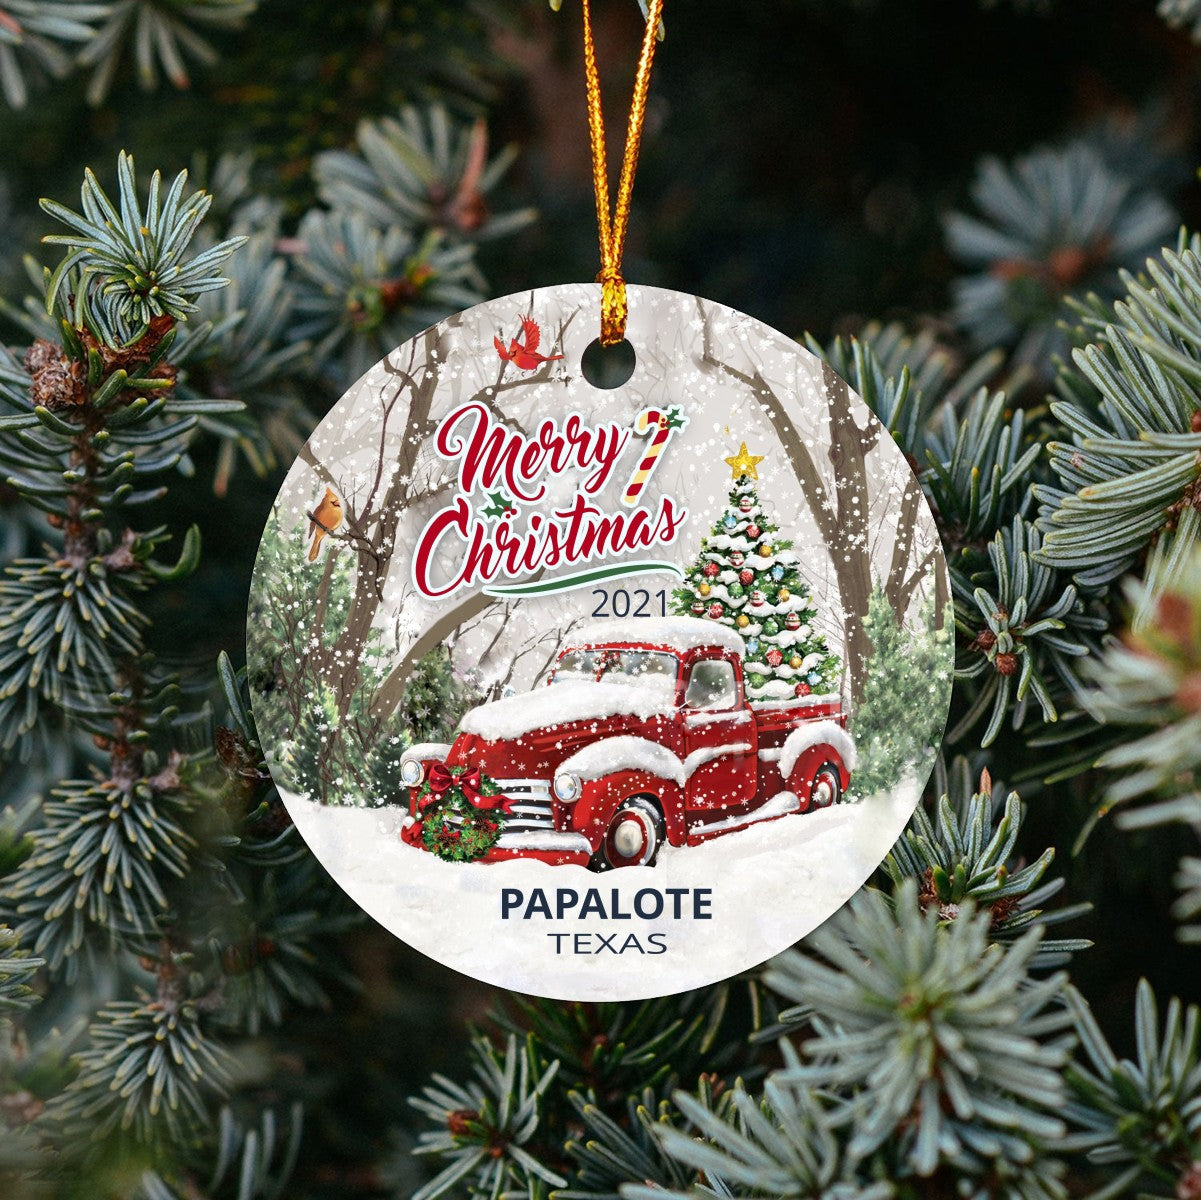 Christmas Tree Ornaments Papalote - Ornament With Name City, State Papalote Texas TX Ornament - Red Truck Xmas Ornaments 3'' Plastic Gift For Family, Friend And Housewarming